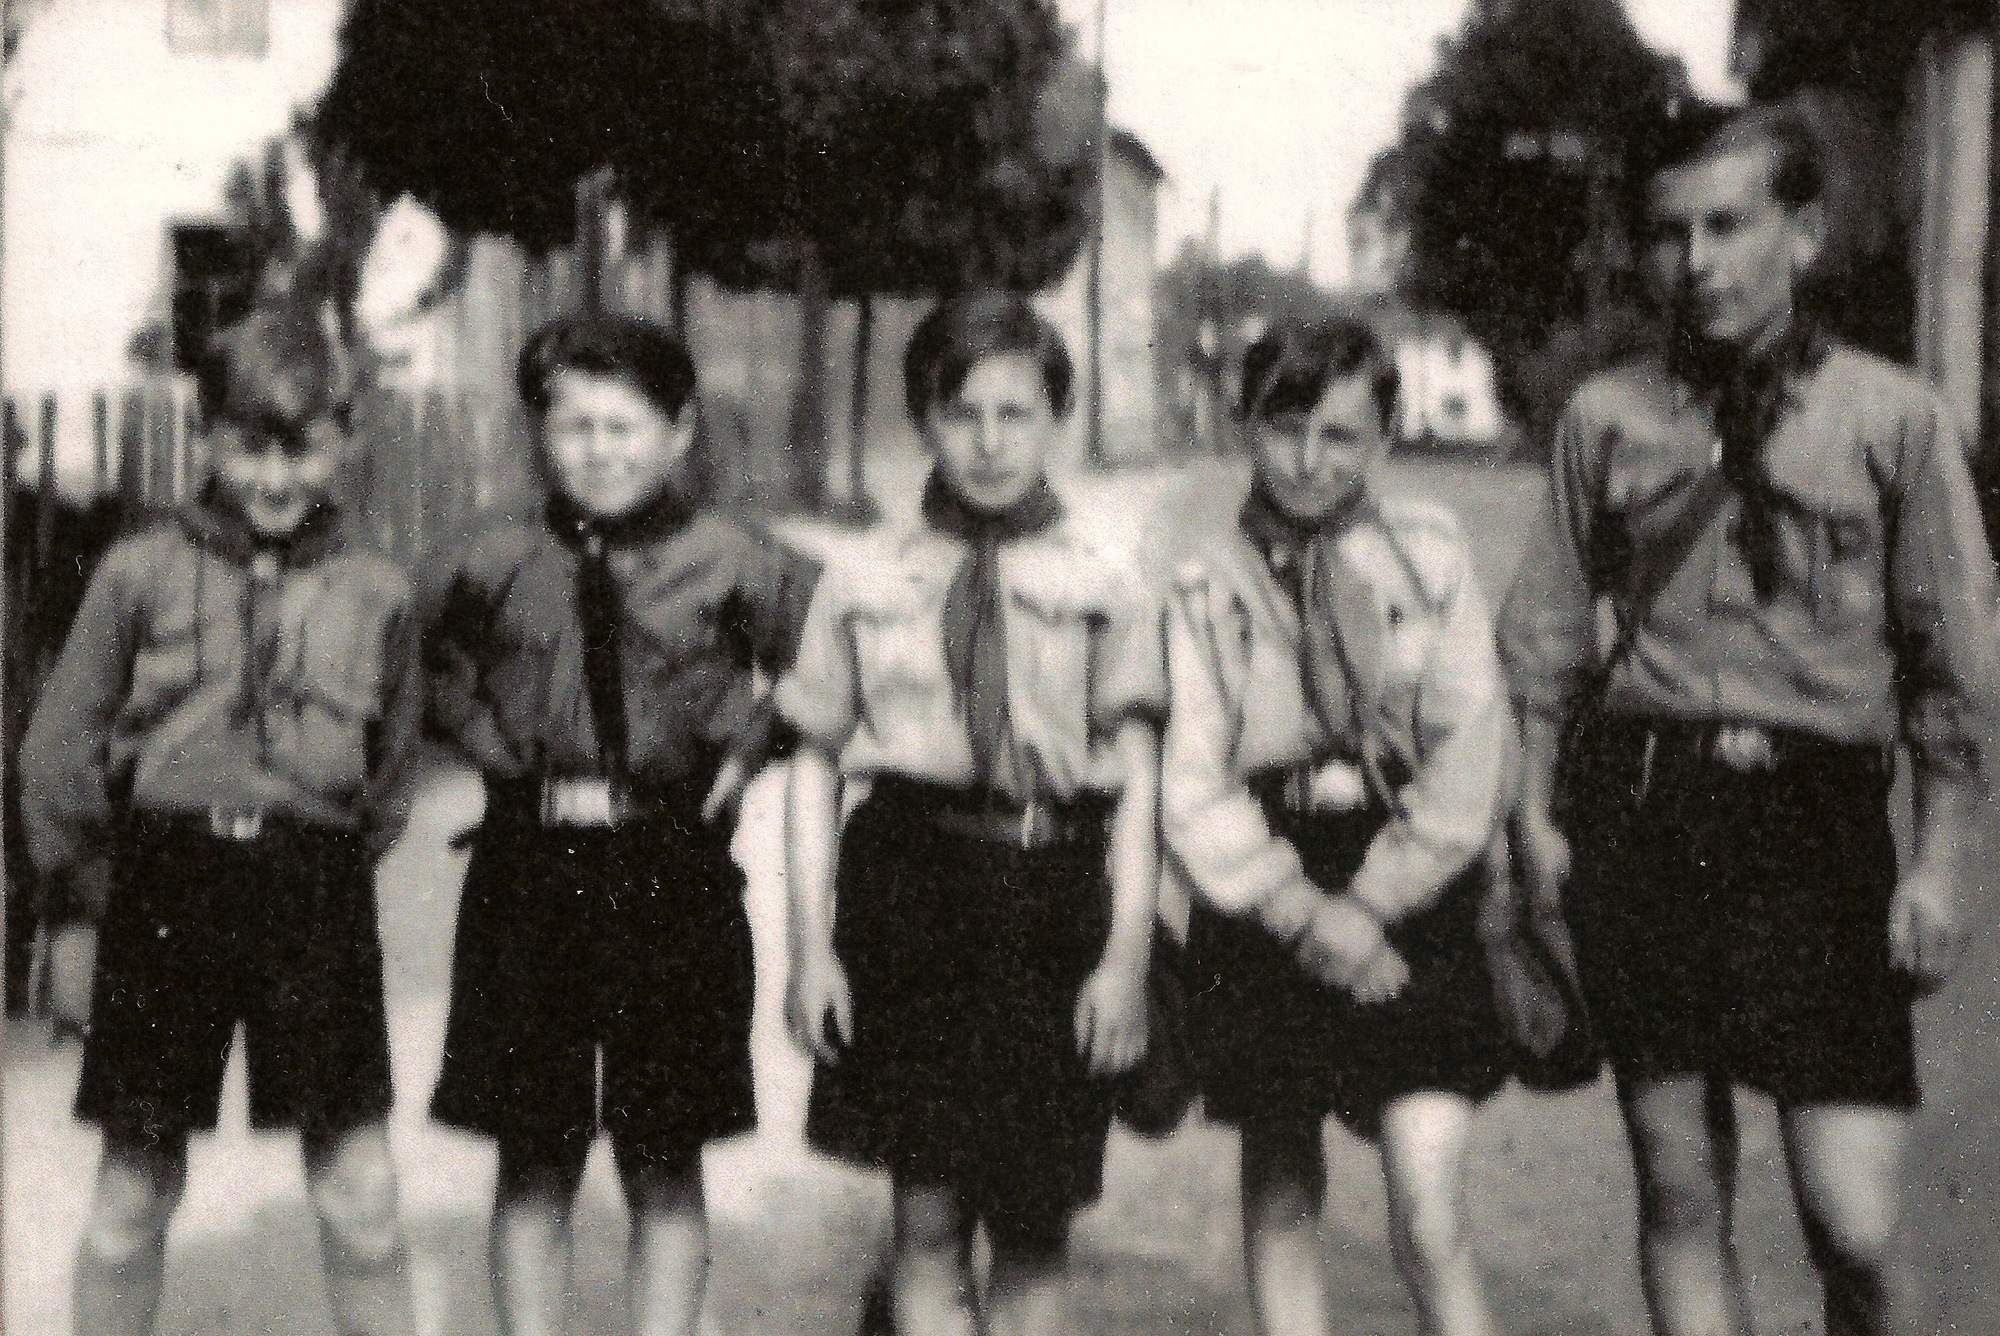 Photo from the Boy Scout chronicle